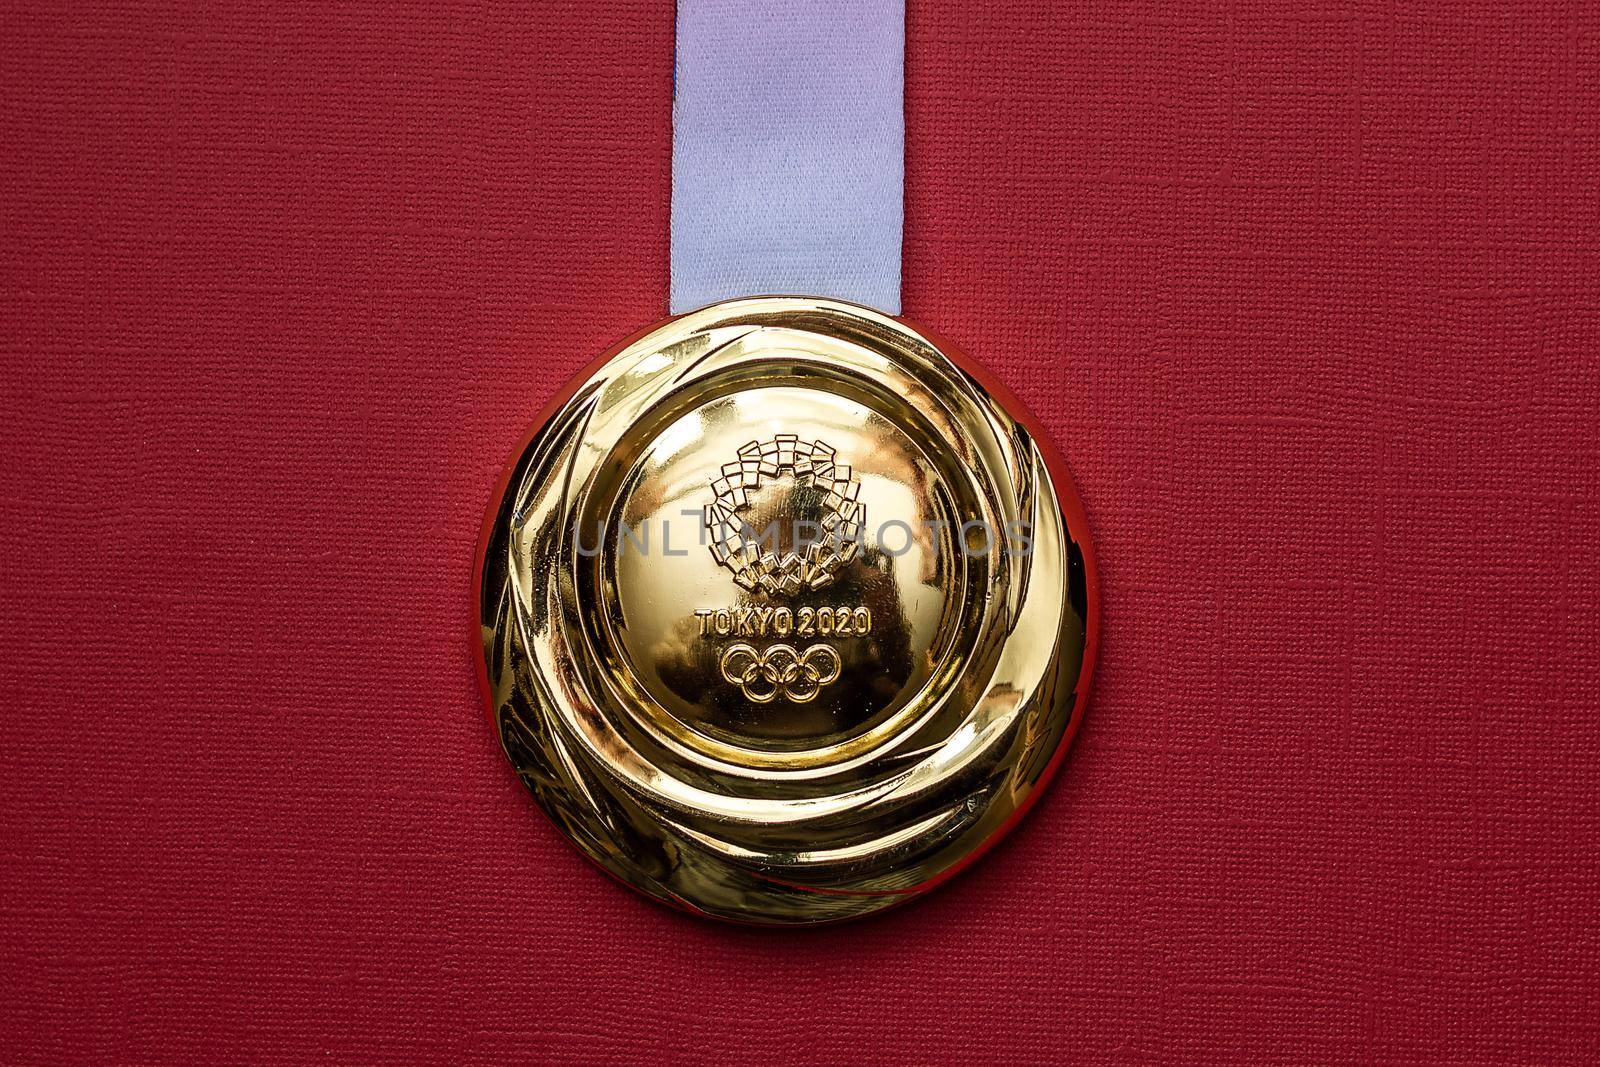 April 25, 2021 Tokyo, Japan. Gold medal of the XXXII Summer Olympic Games in Tokyo on a red background.